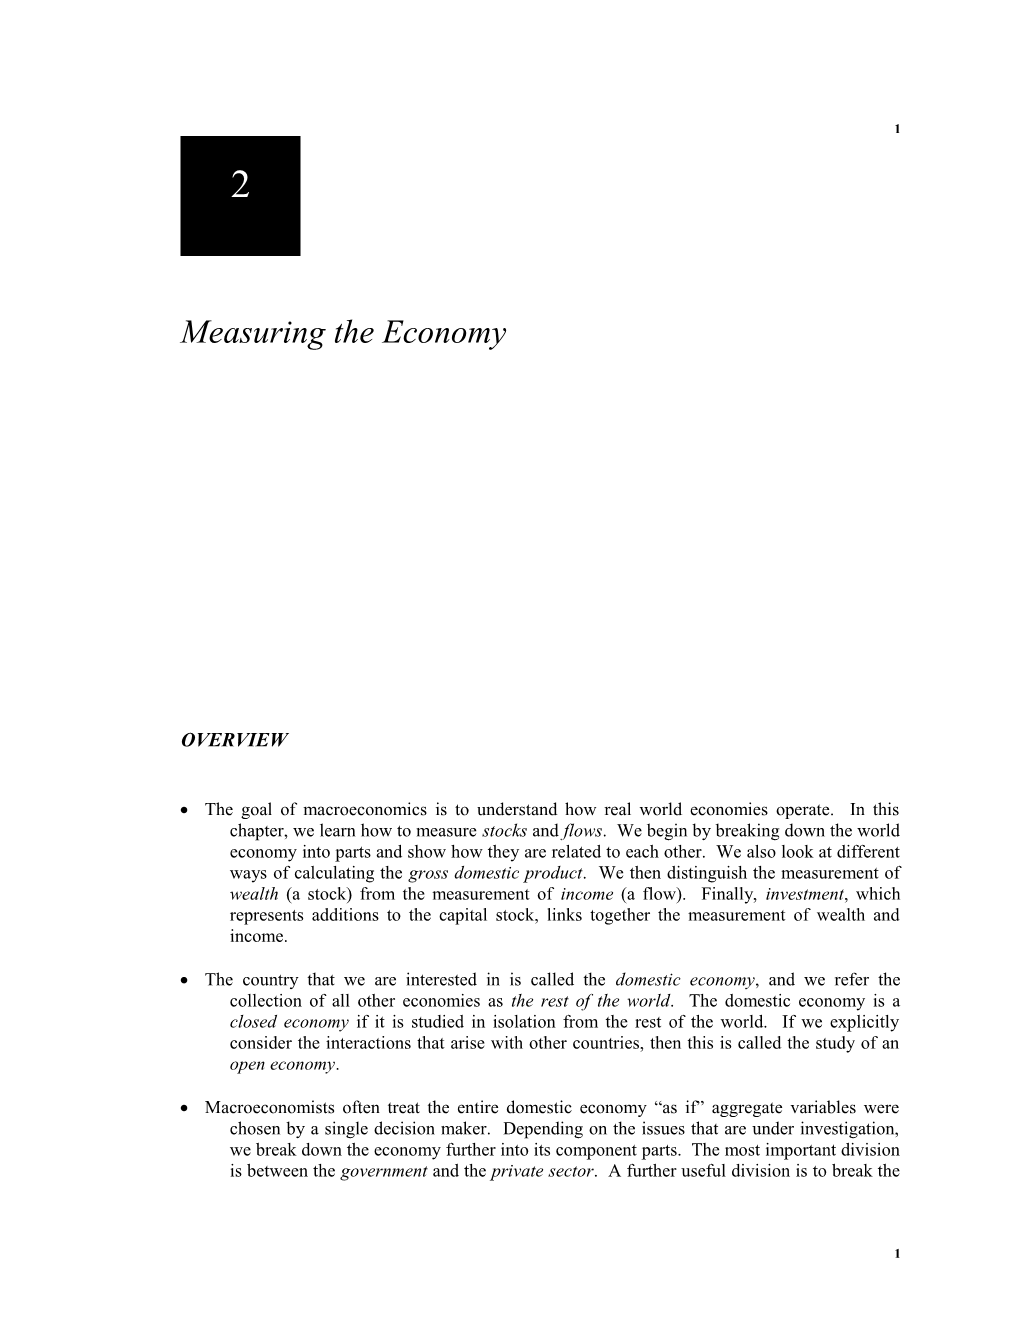 Chapter 2: Measuring the Economy1